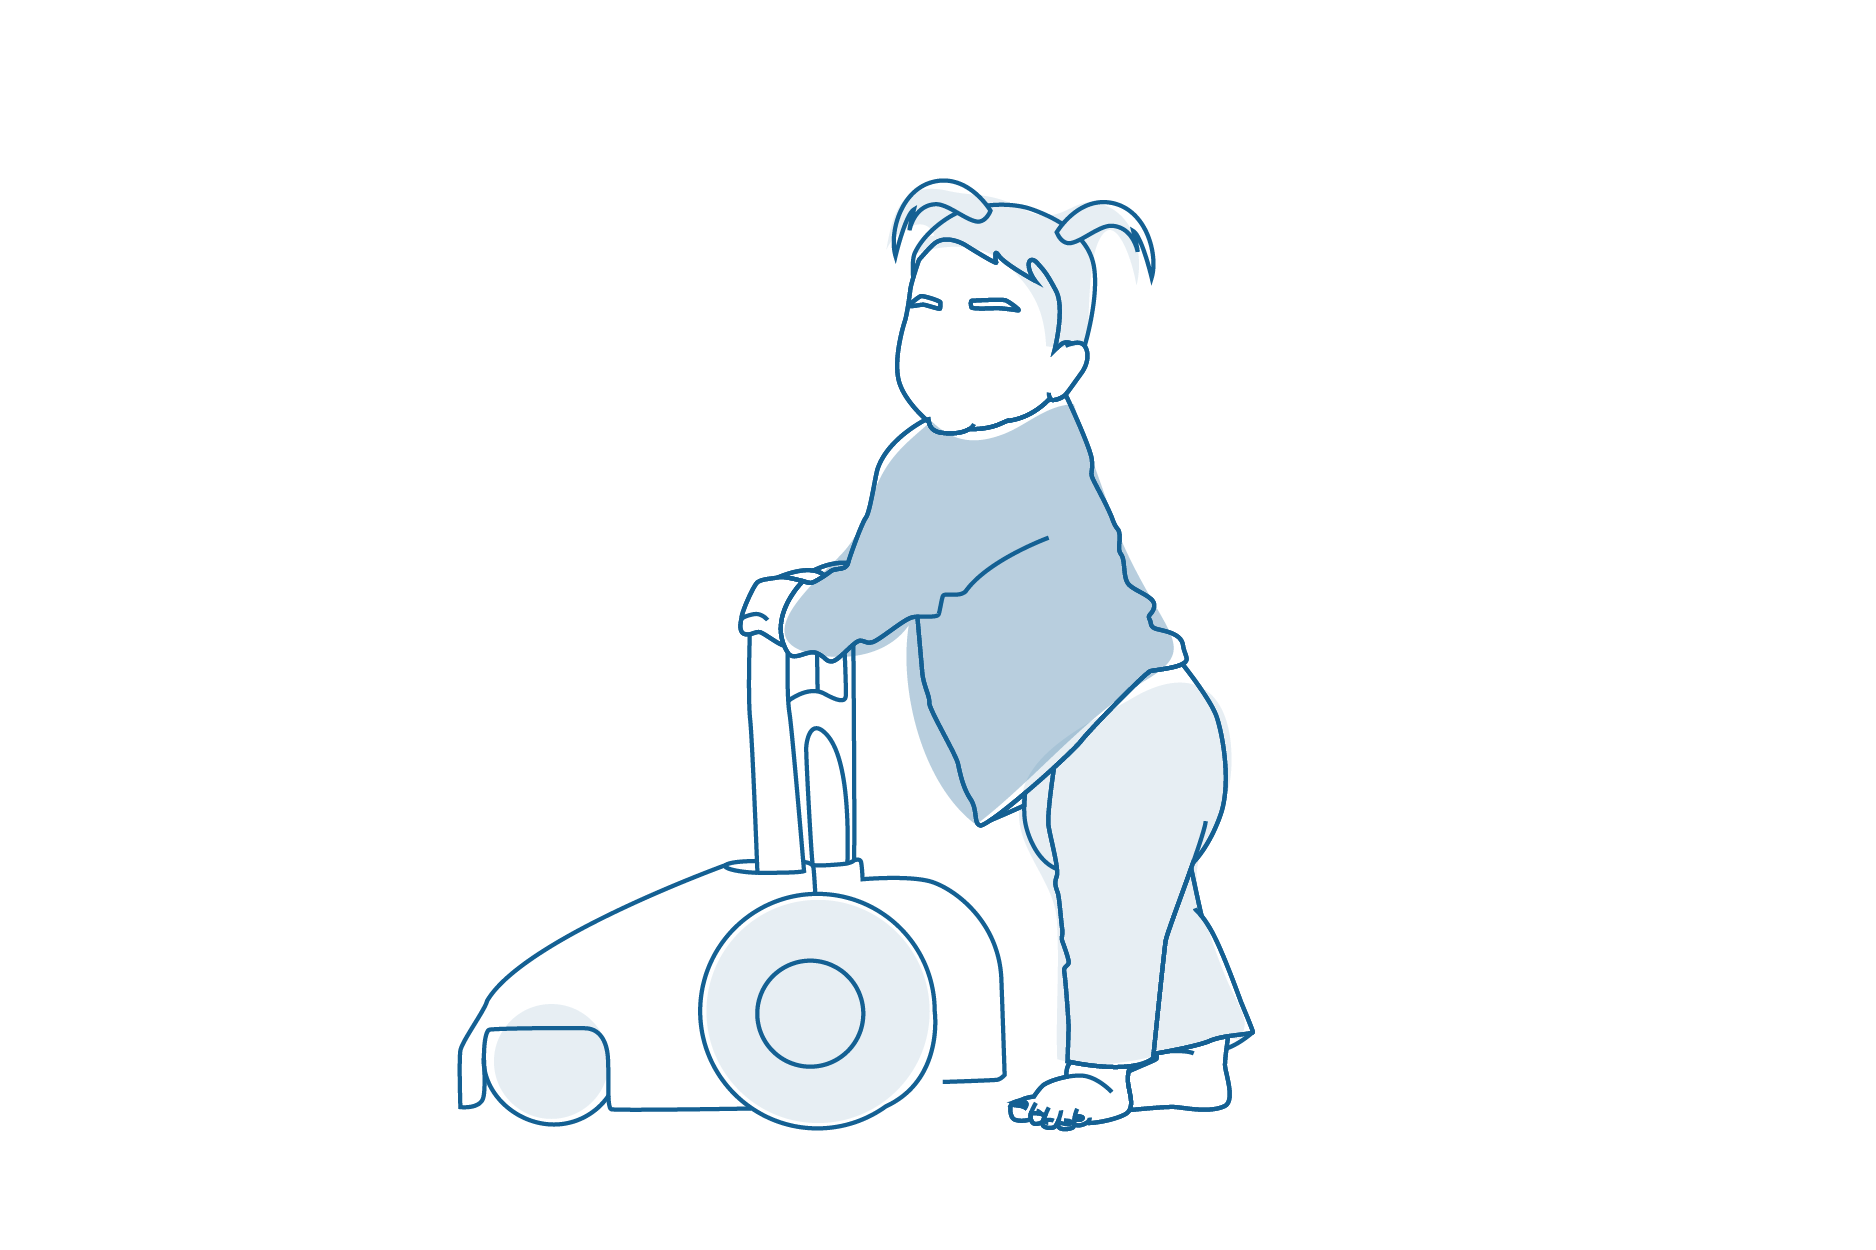 An illustration of a young girl pushing a walker.